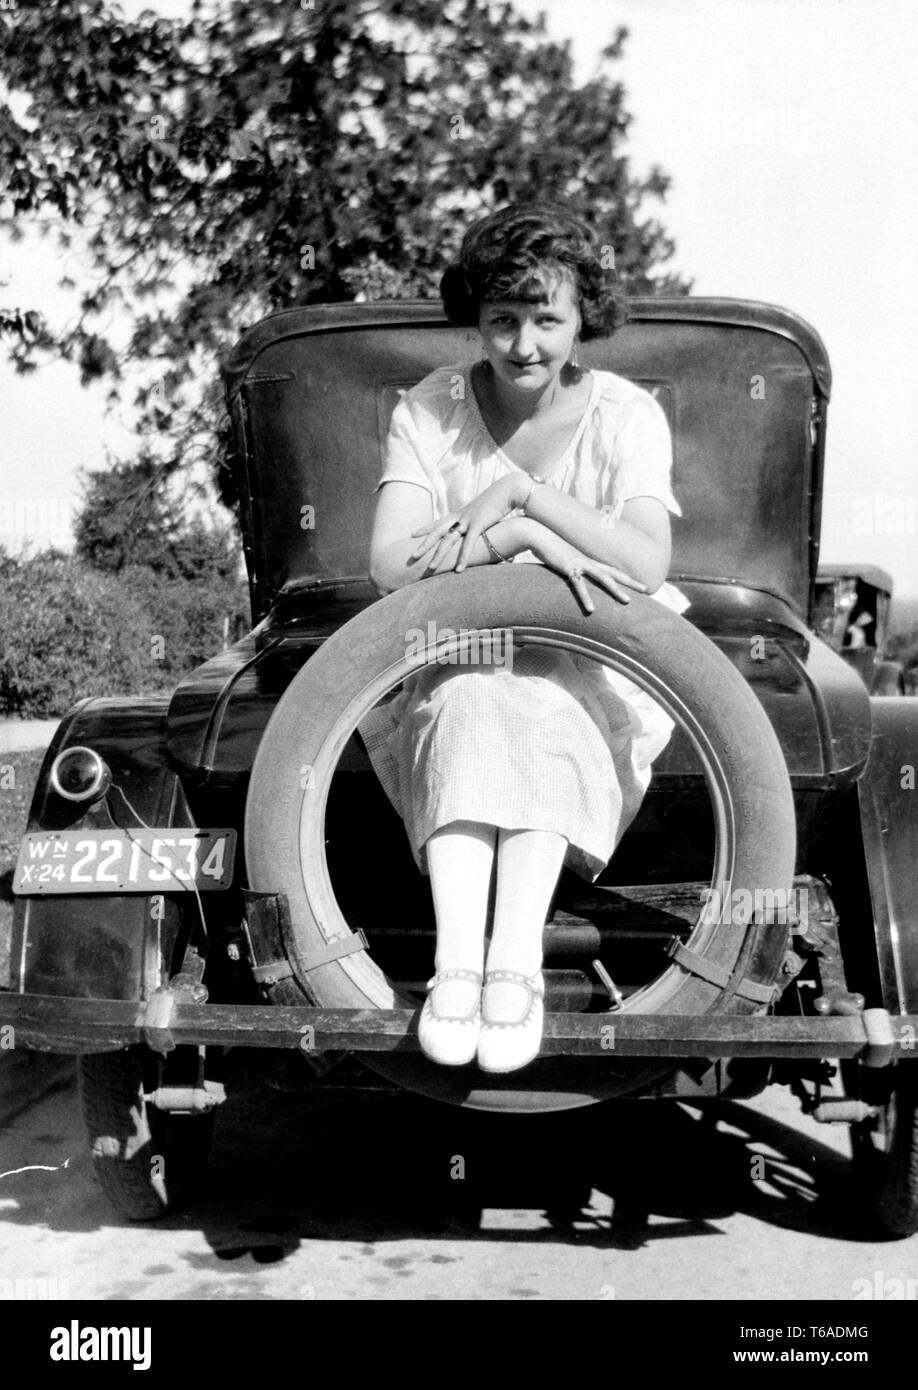 A young woman poses on the rear of a period car with her feet through the spare tire, ca. 1924. Stock Photo